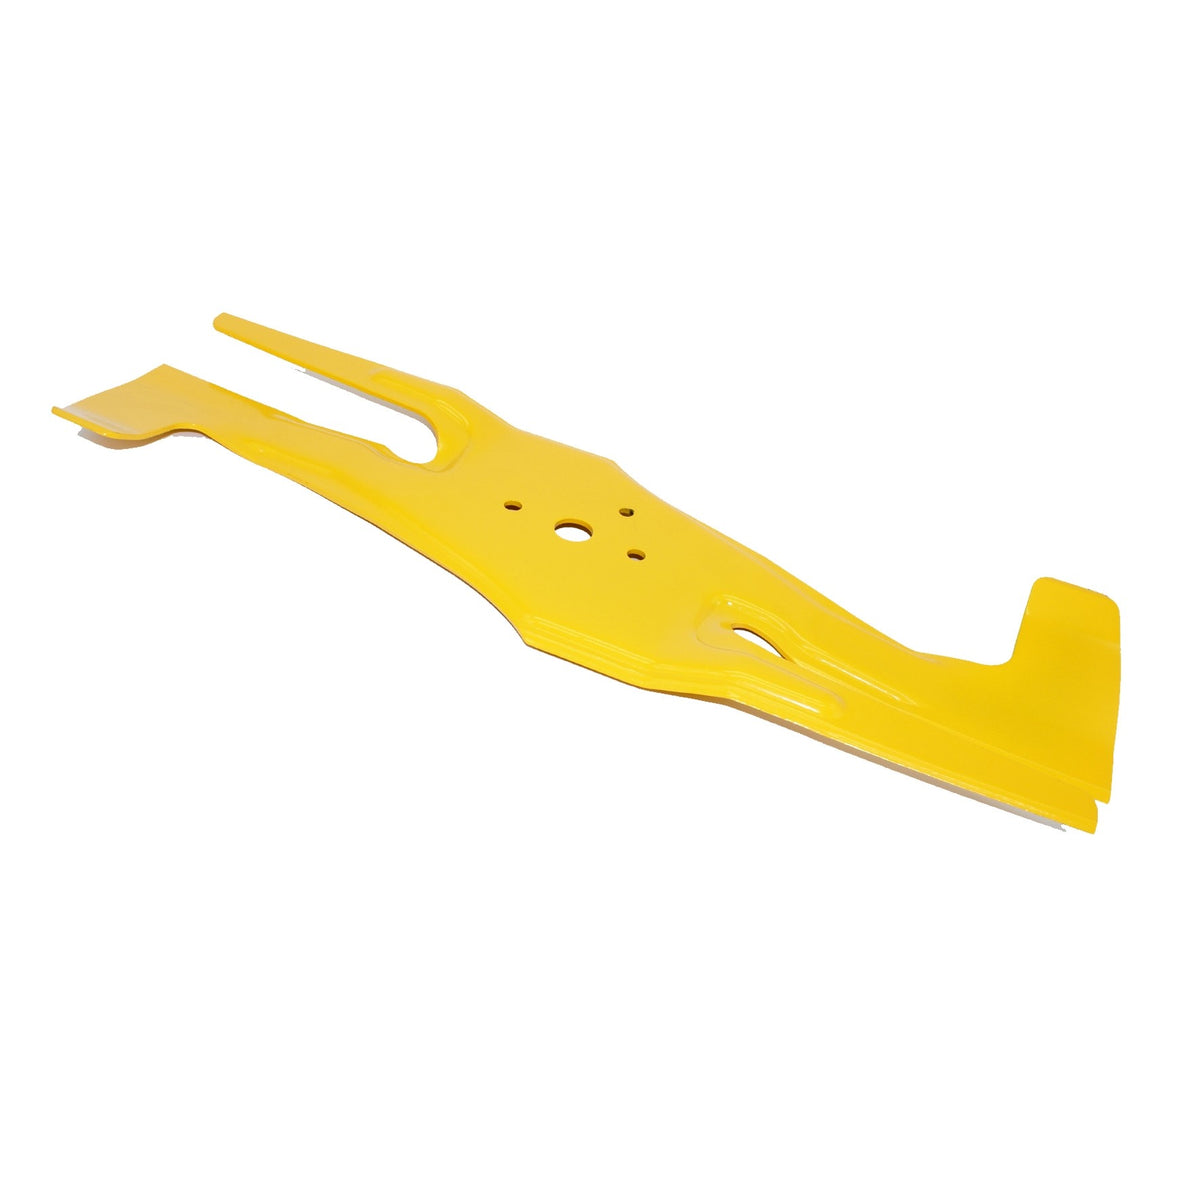 Stiga / Mountfield Parts - TWINCLIP BLADE 55 Part Number: 181004417/0